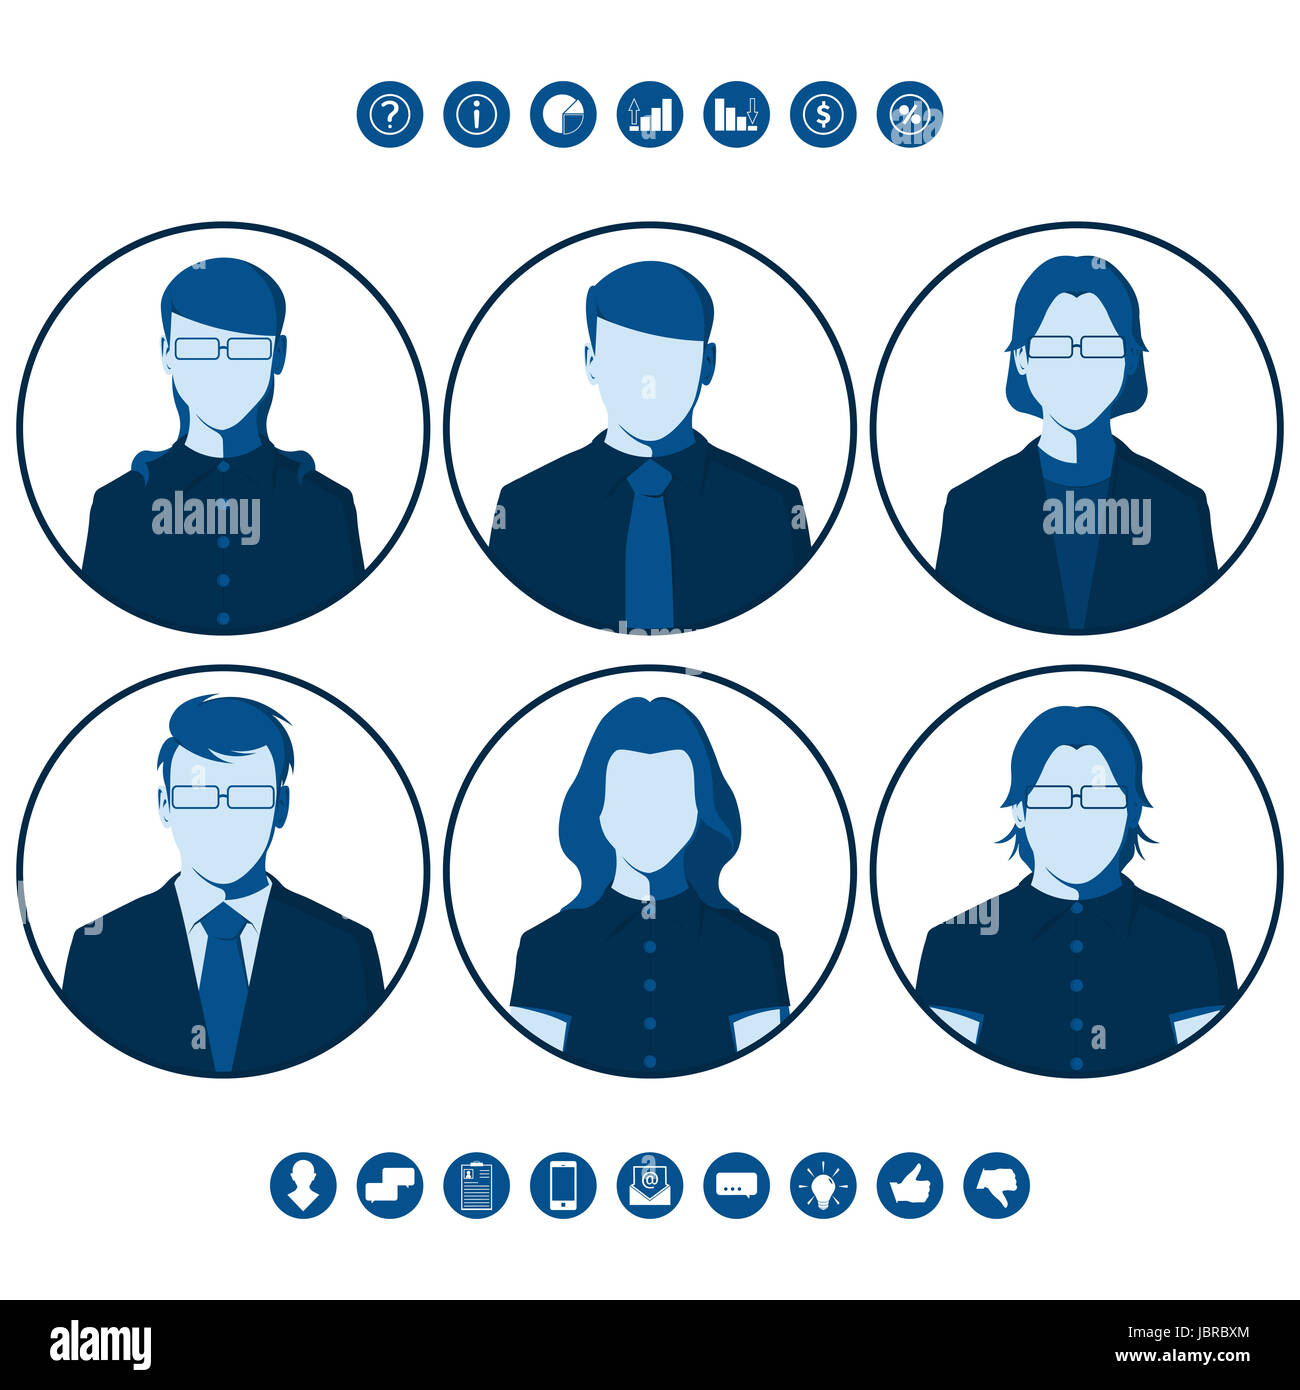 Flat silhouettes of business people for user profile picture. Round icons with male and female portraits. Set of avatars. Stock Photo